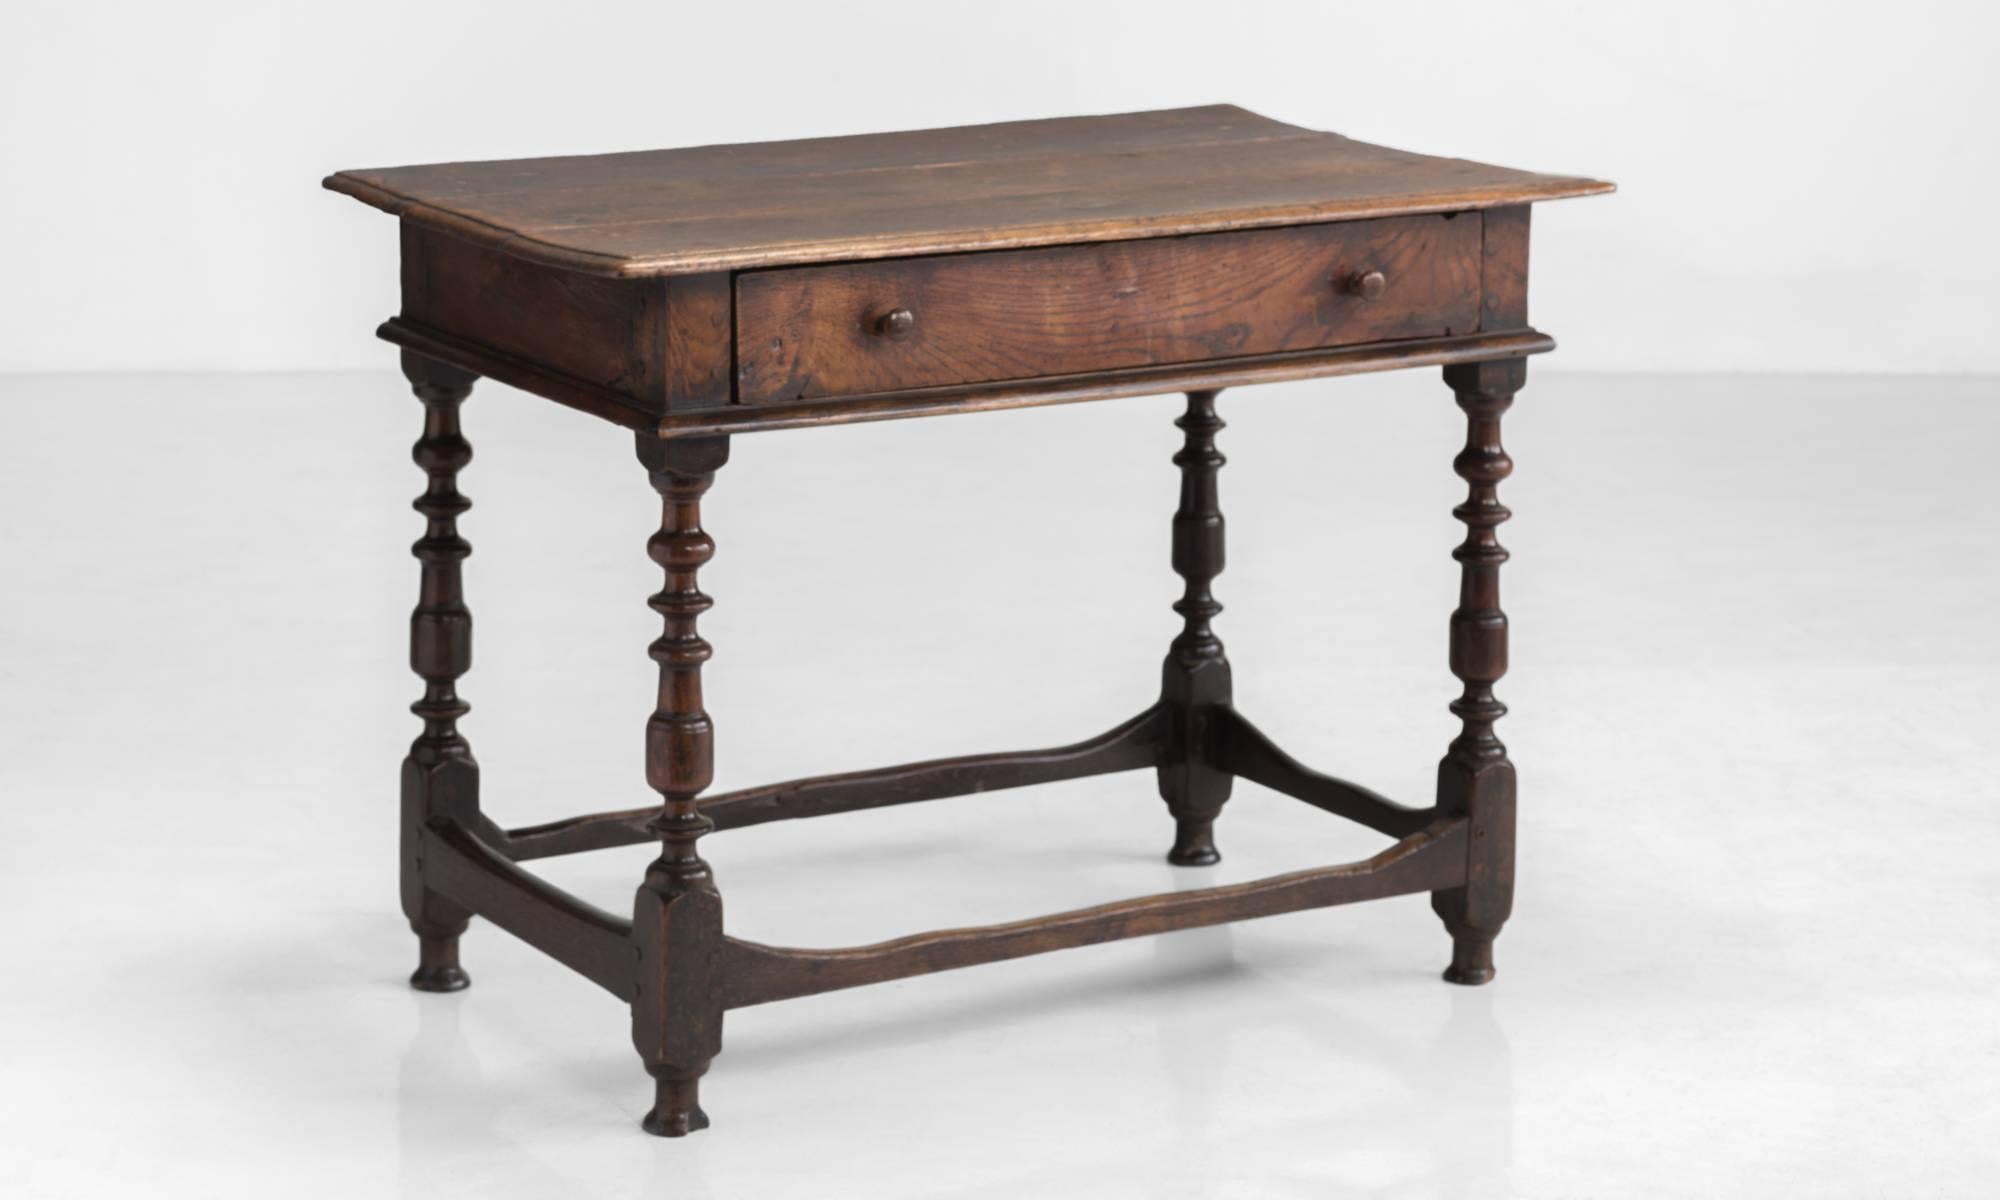 Oak side table, circa 1790.

Unique form in original finish with beautiful patina, pull out drawer and turned legs.